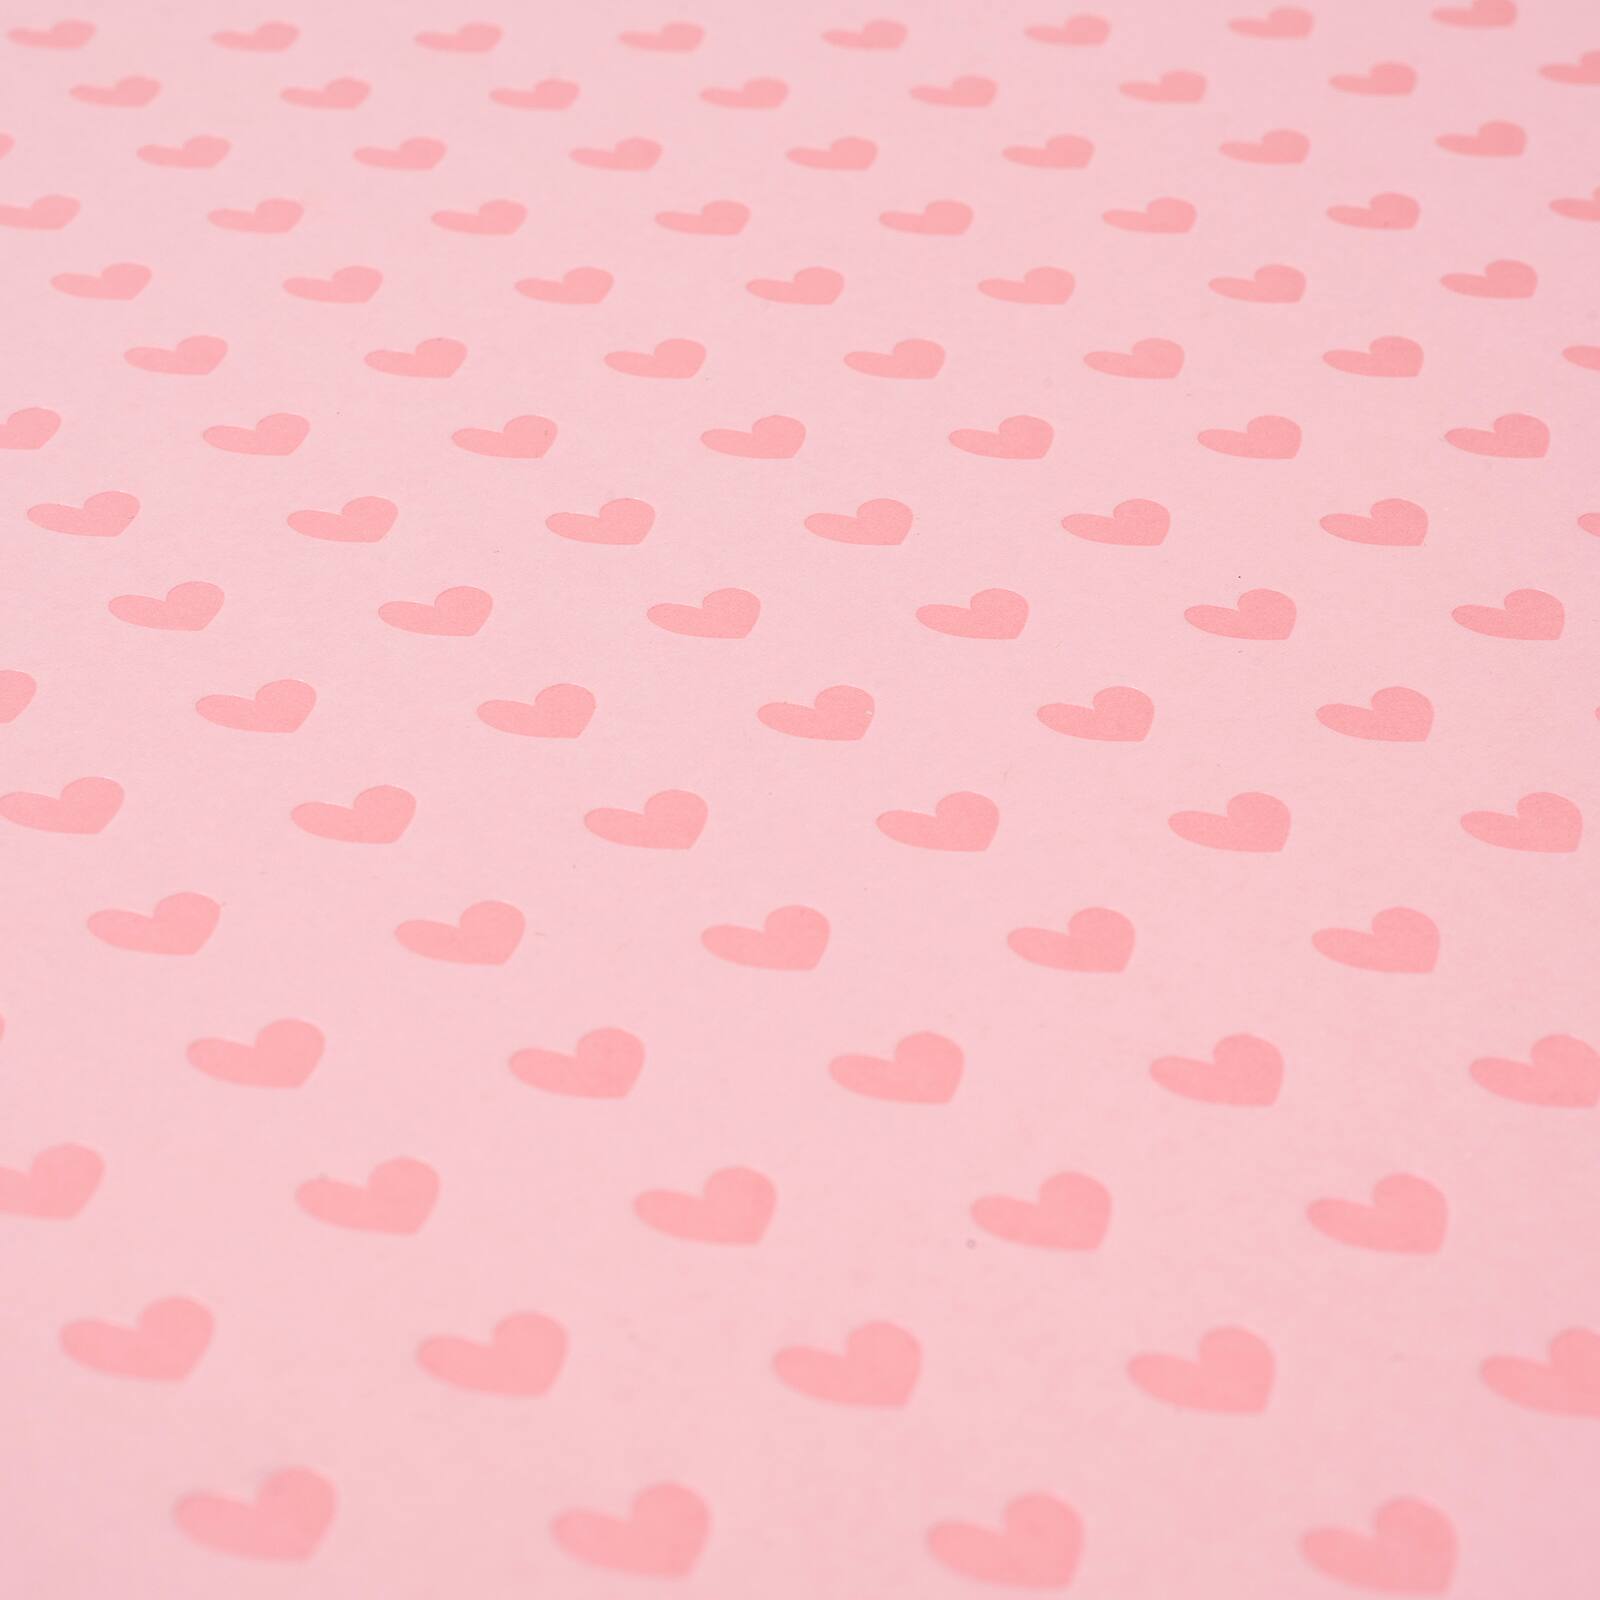 Shop for the Pink Foil Heart Paper By Recollections® at Michaels